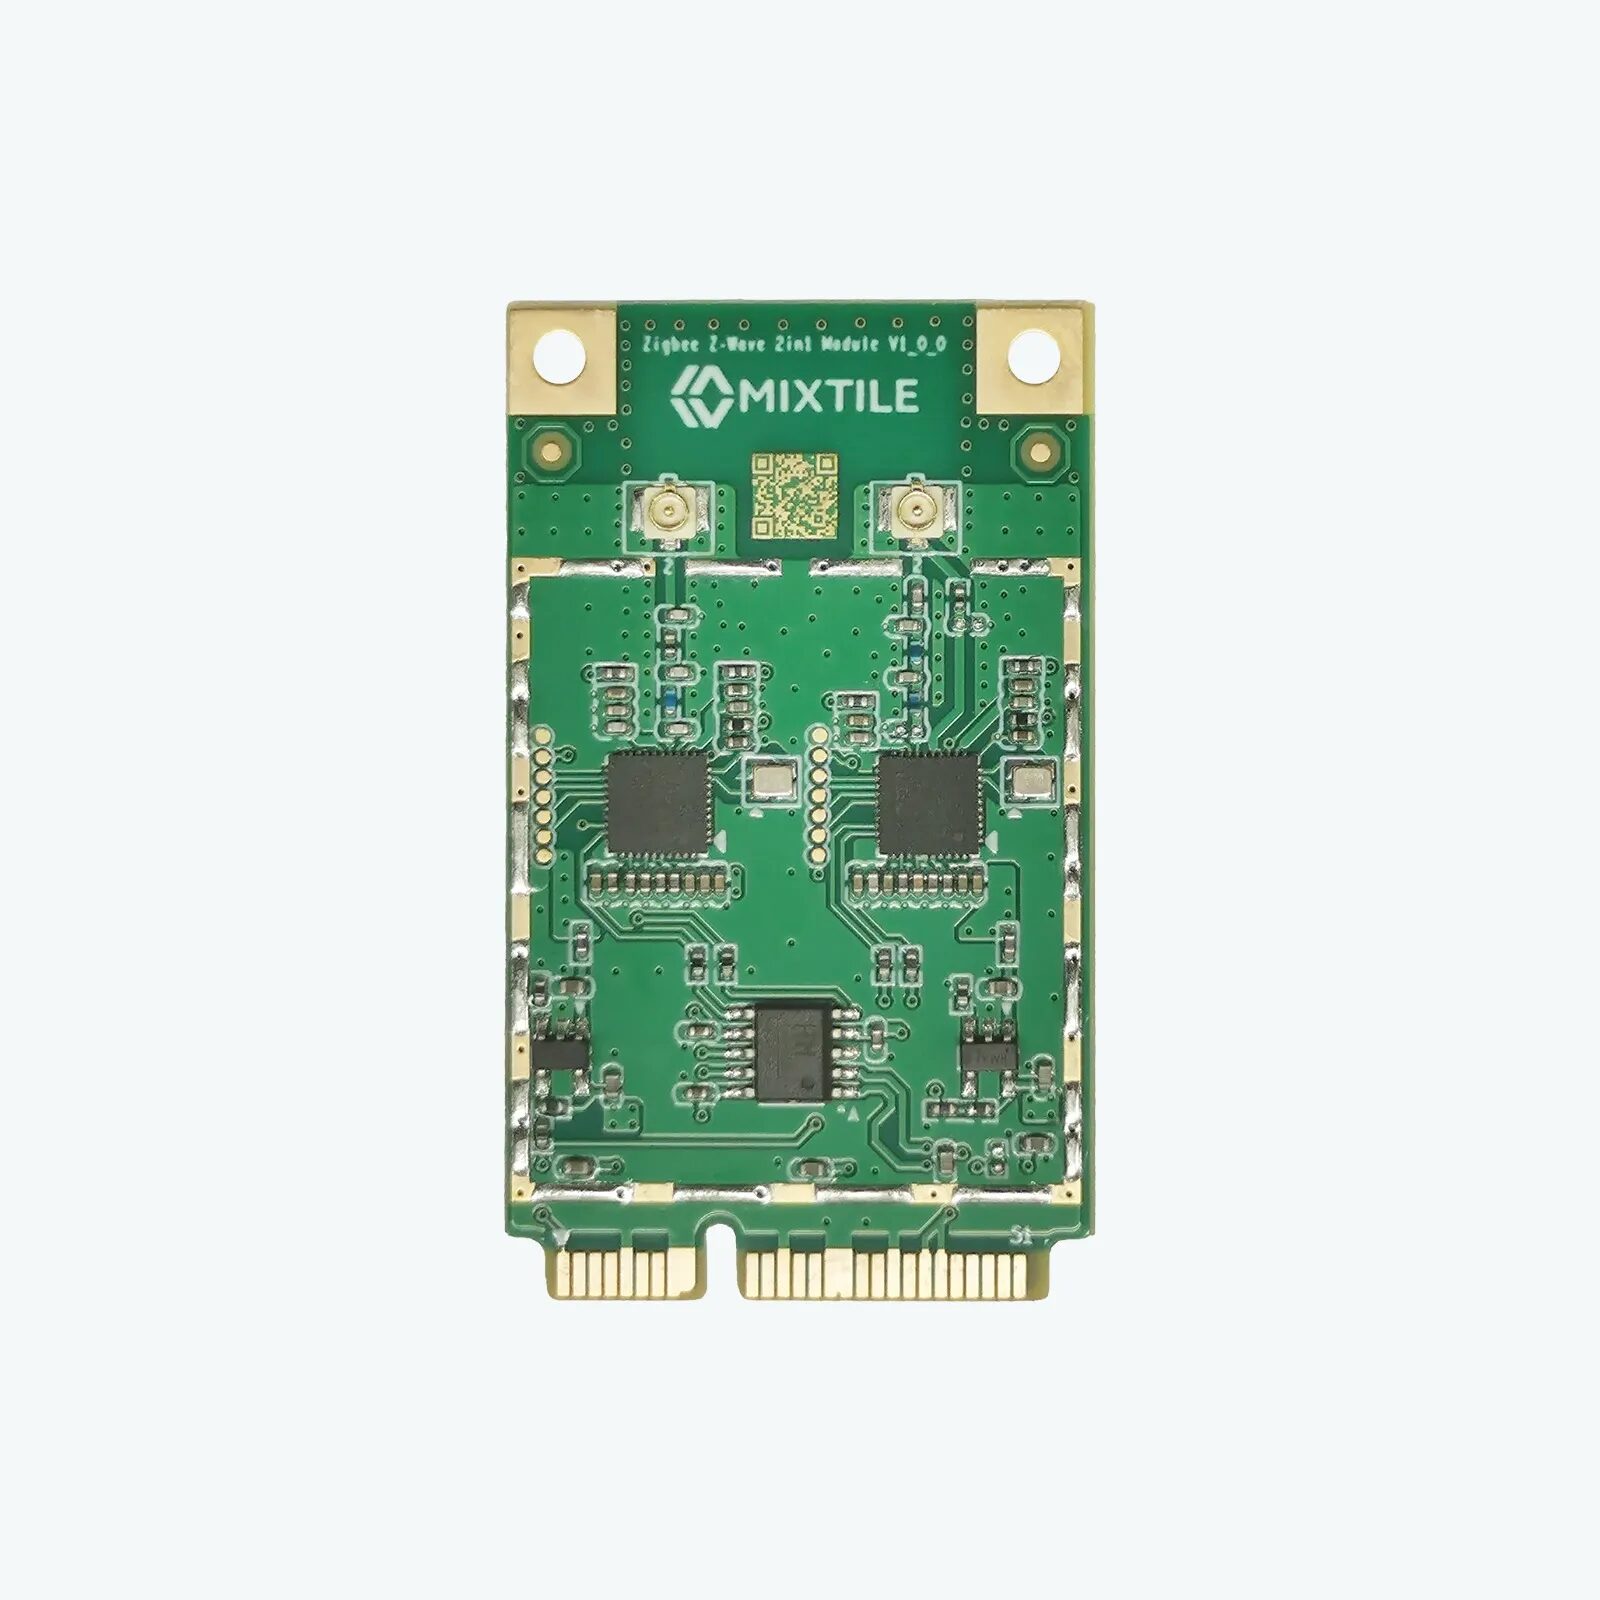 Mixtile Zigbee and Z-Wave 2-in-1 mPCIe Interface Cost Only $19.90